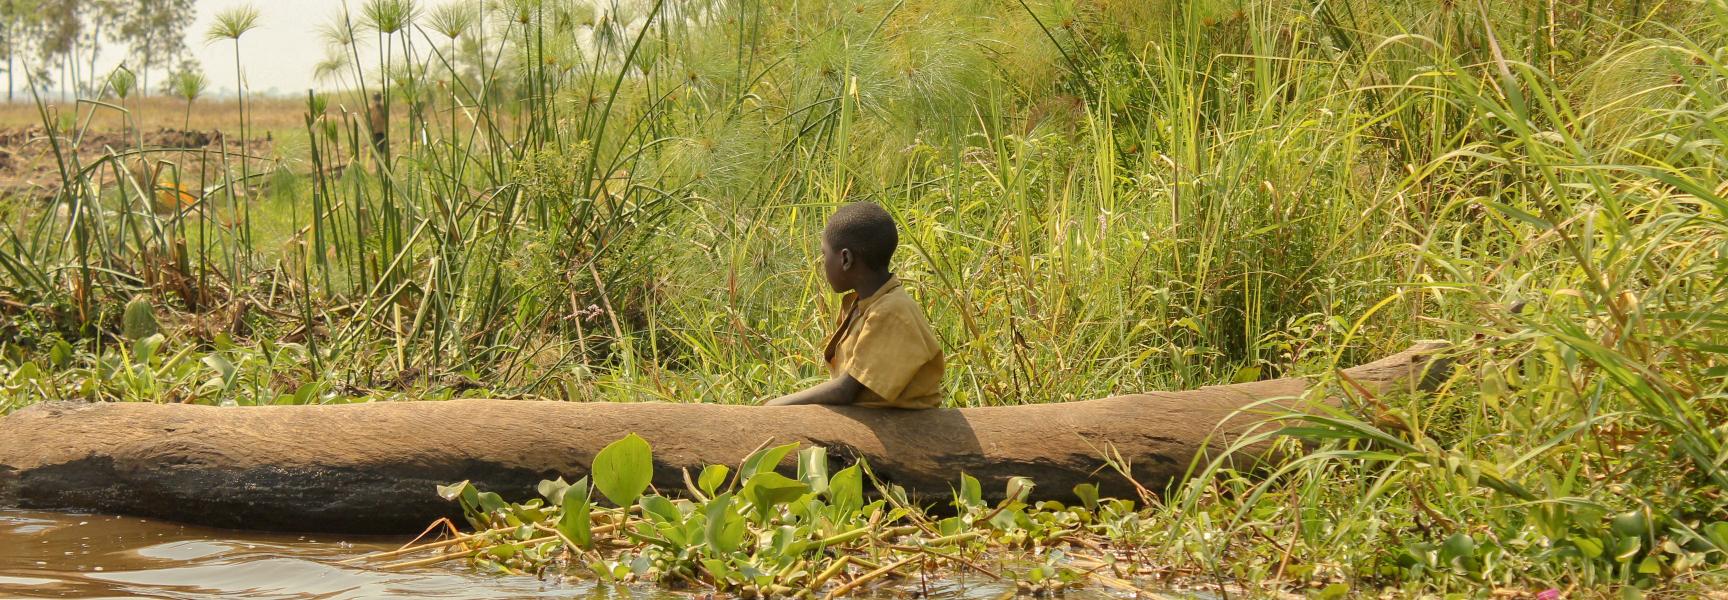 A child in a small boat by the river in Rwanda